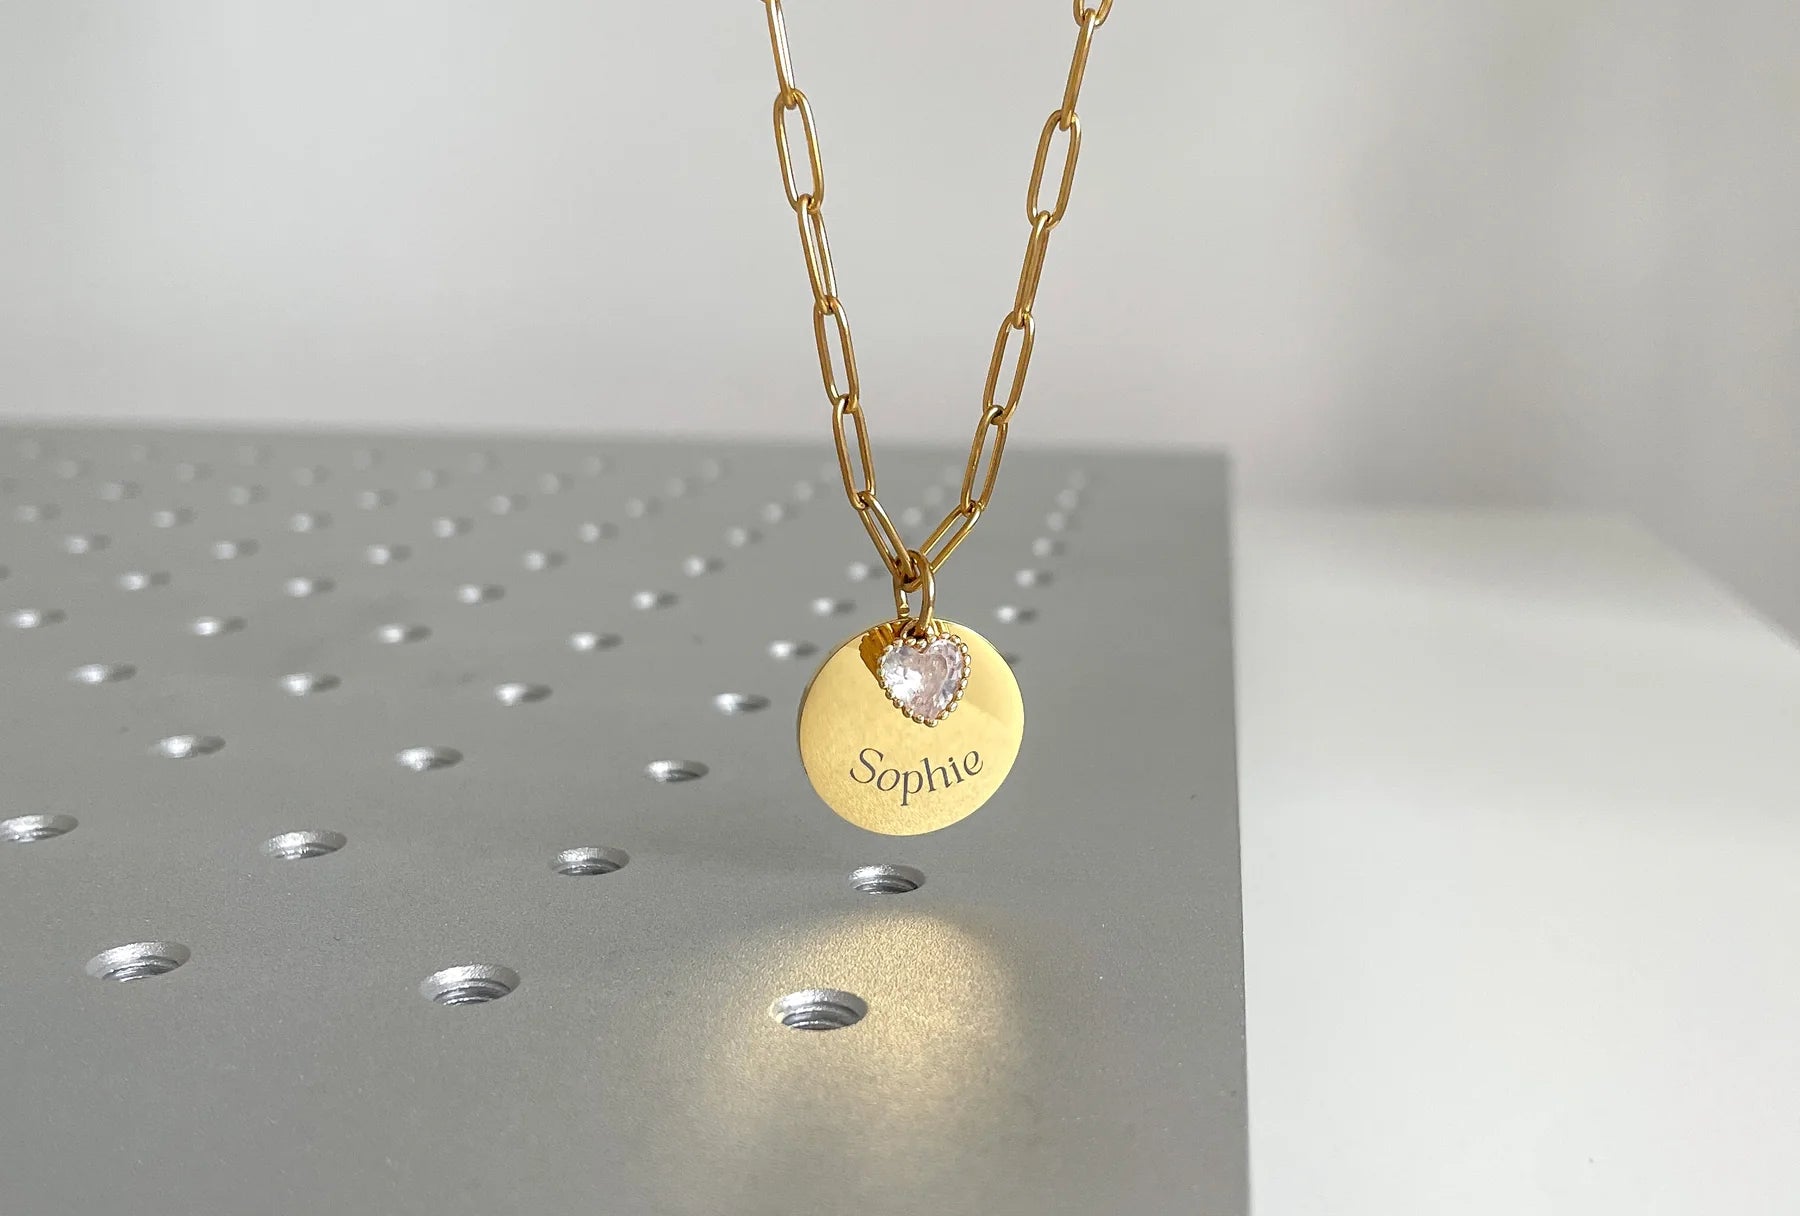 The Initial Charm Necklace